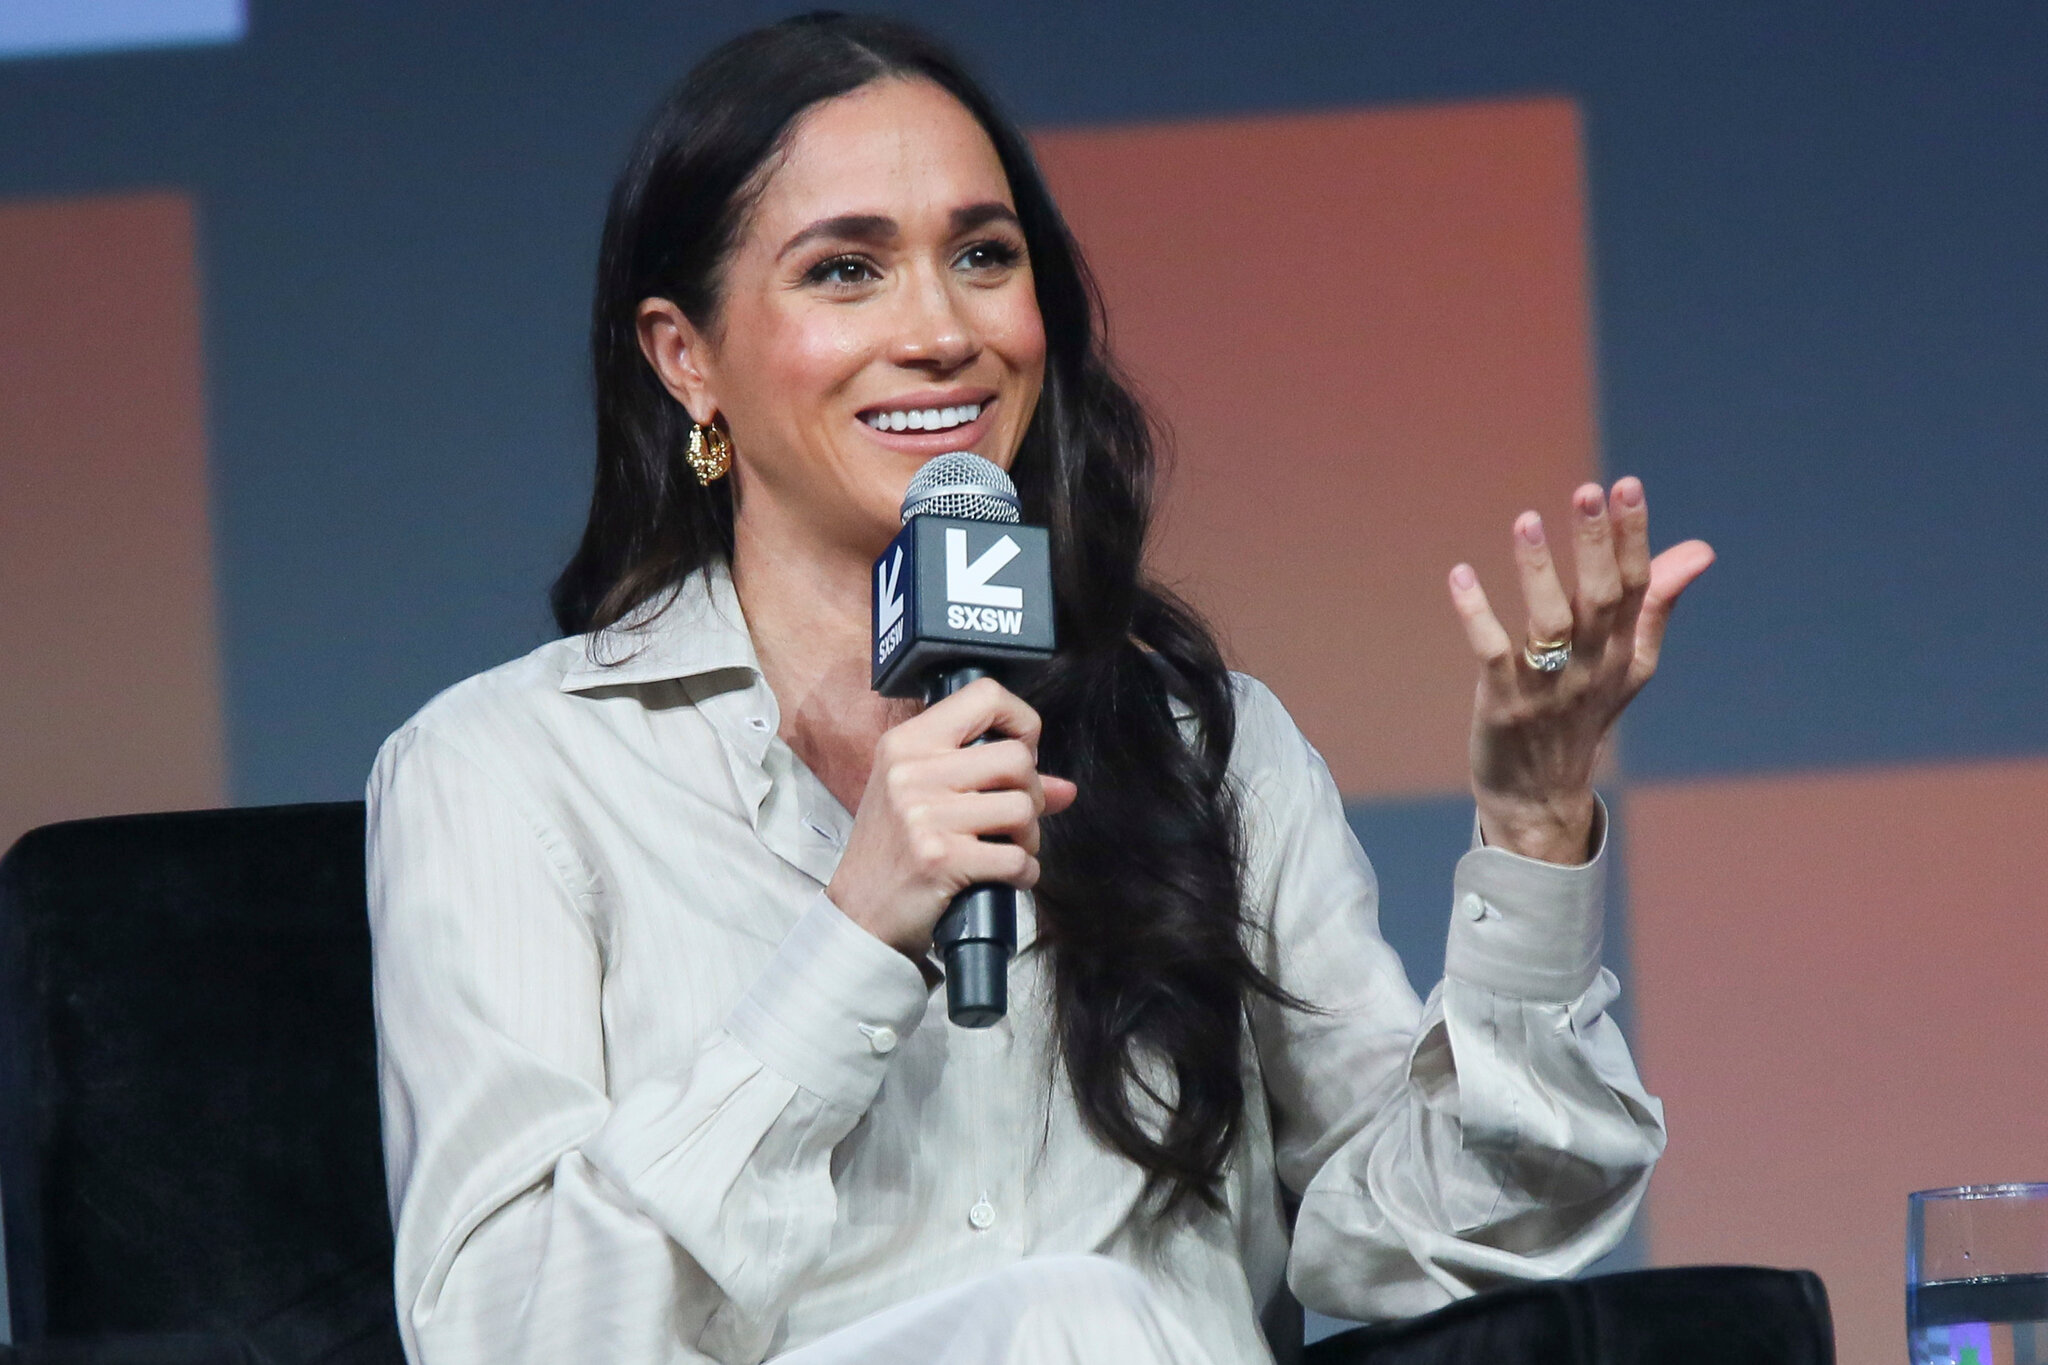 Lawsuit against Meghan Markle dismissed (Credits: The NY Times)